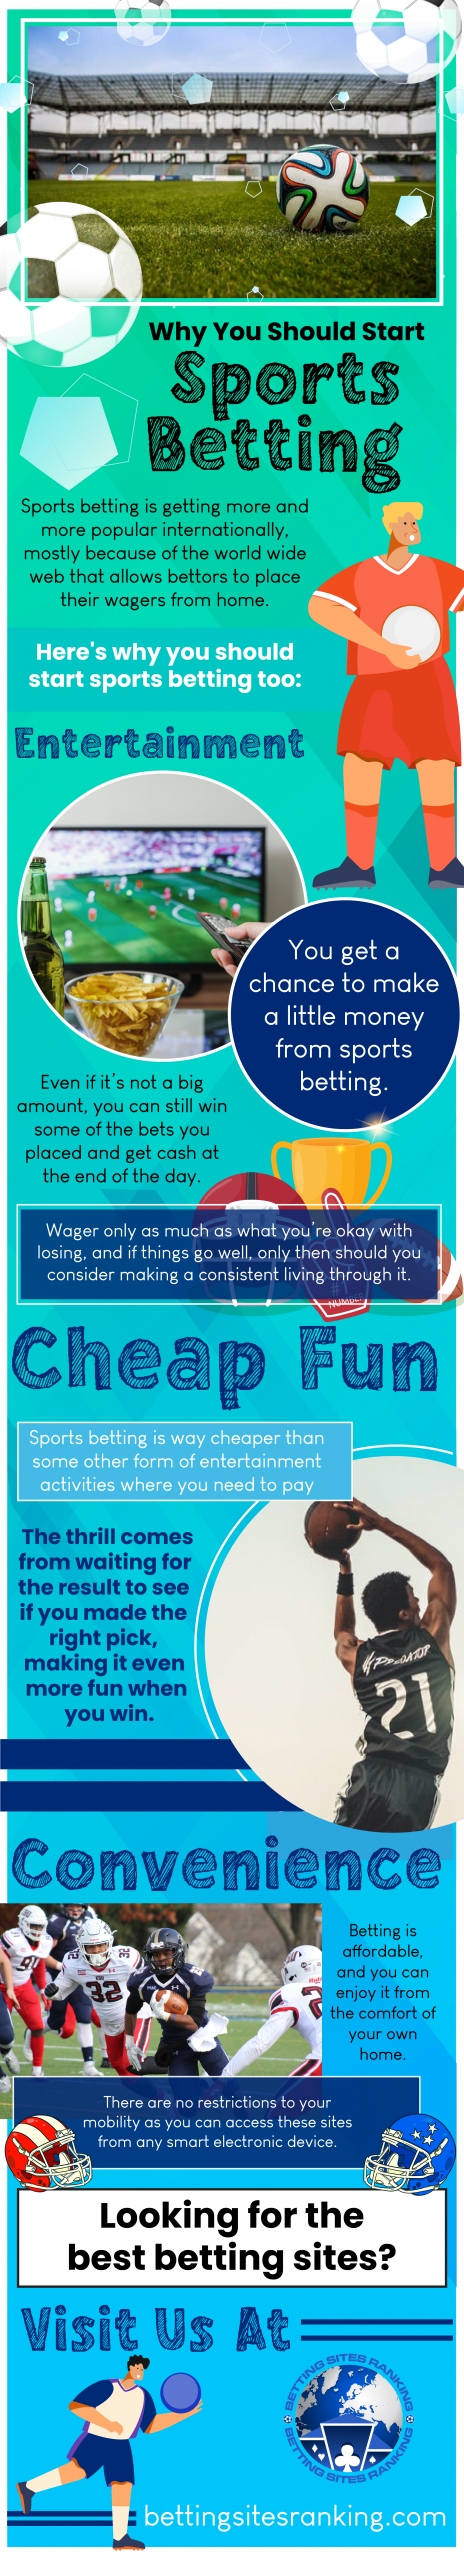 Why-You-Should-Start-Sports-Betting